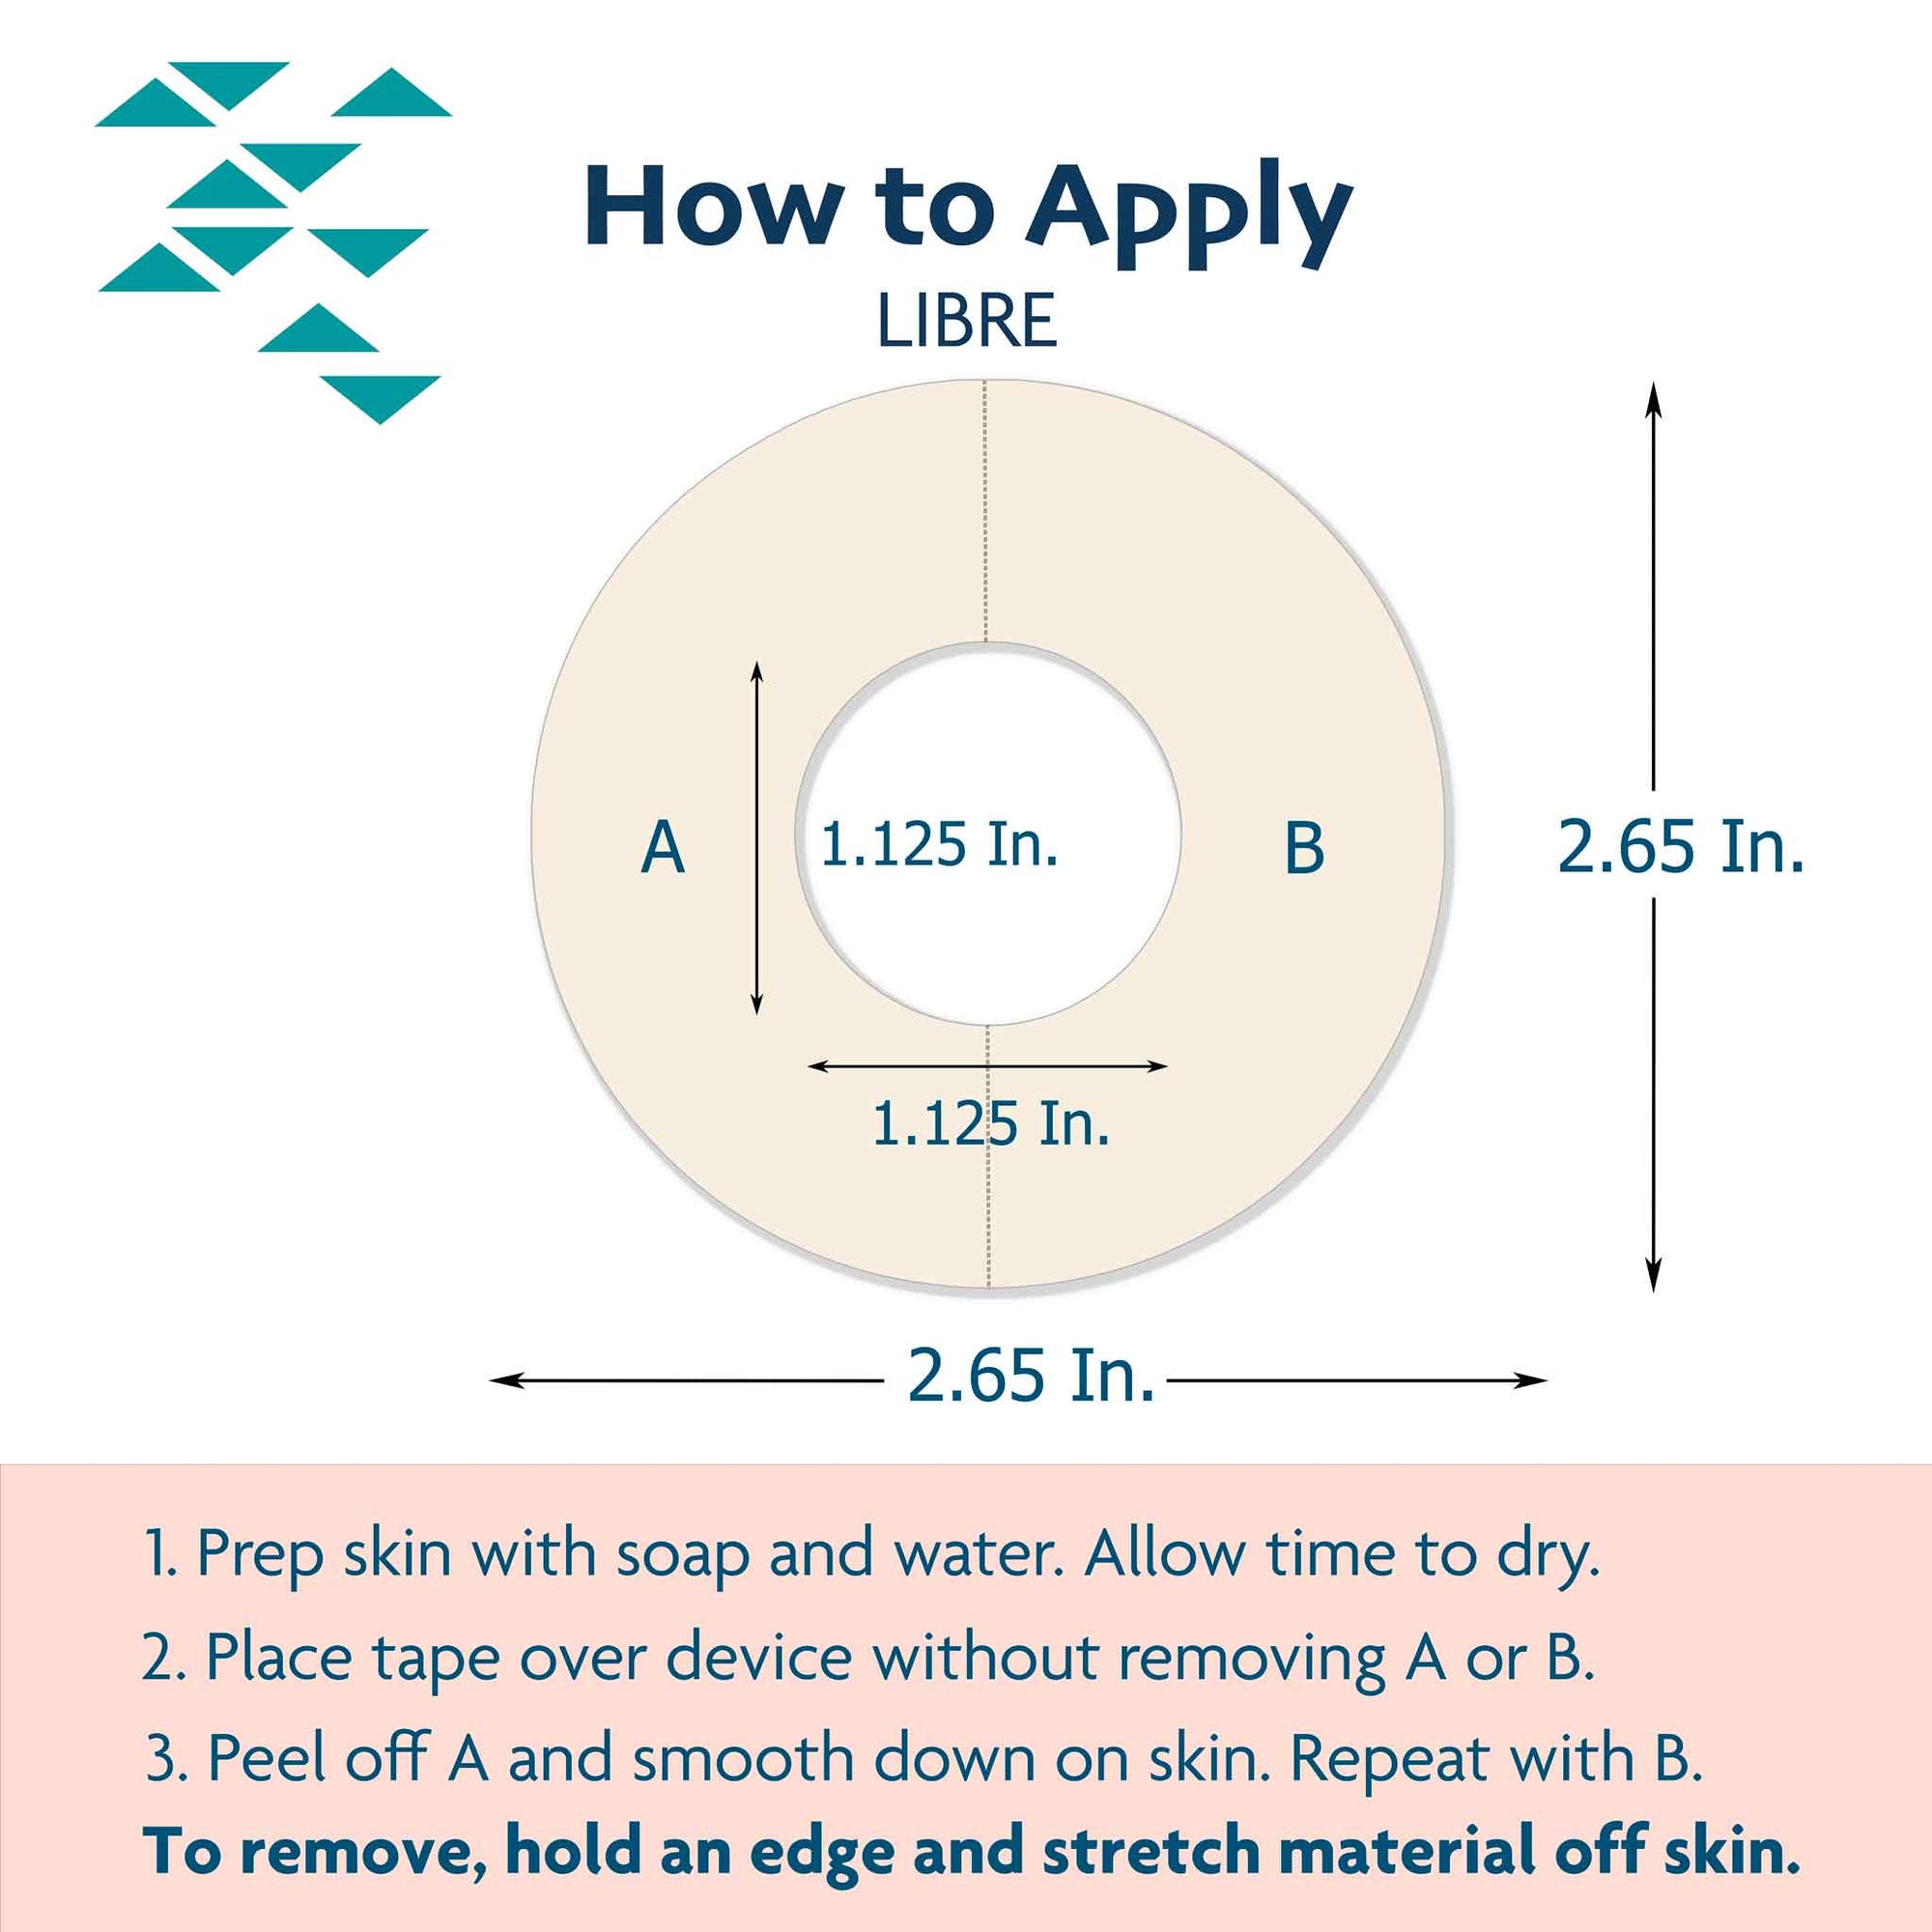 ExpressionMed Guide for properly applying patch to libre freestyle system